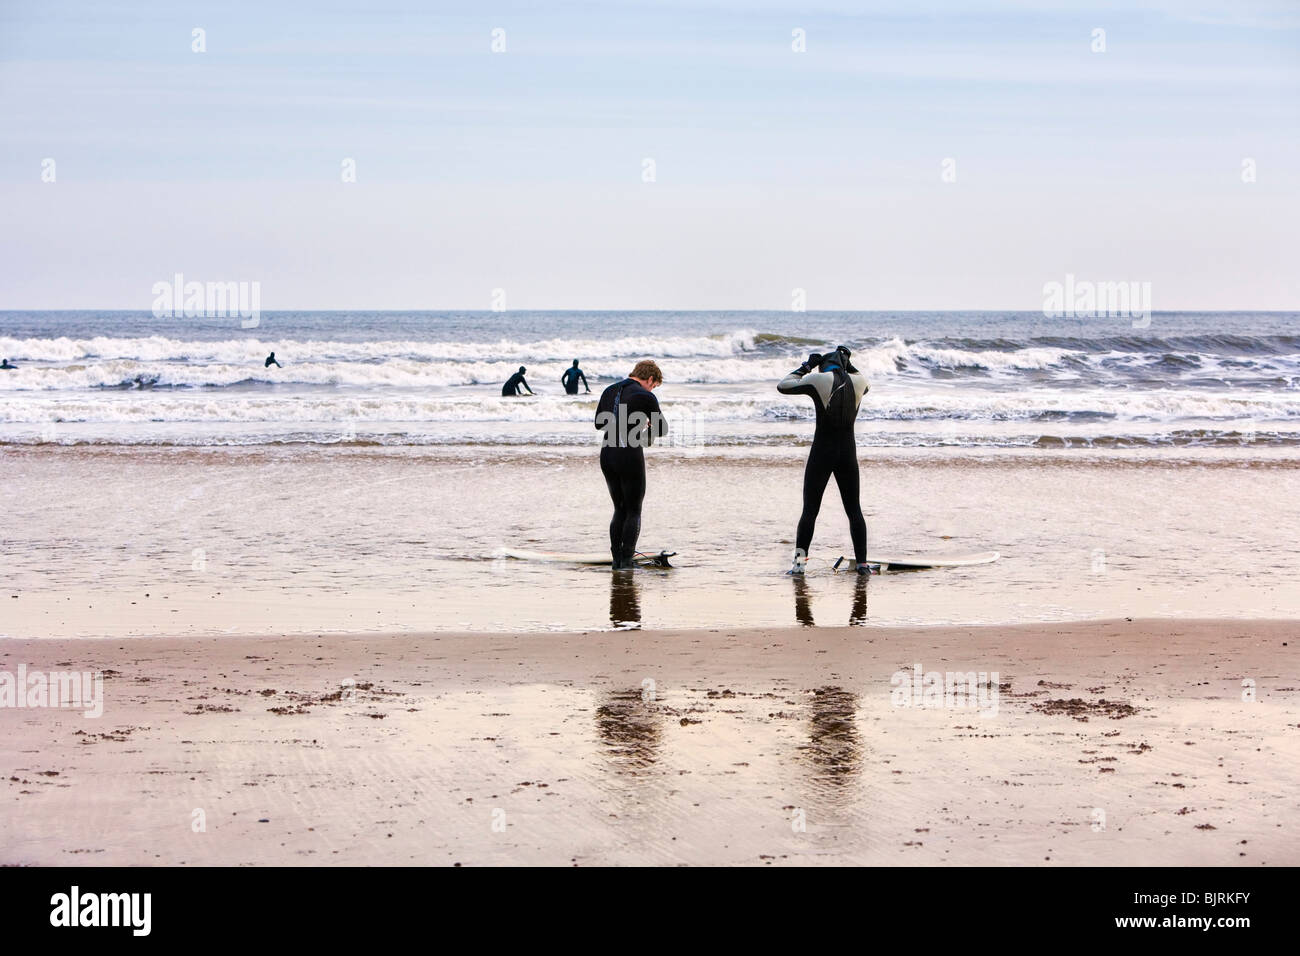 Surfers on beach in winter time England UK Stock Photo